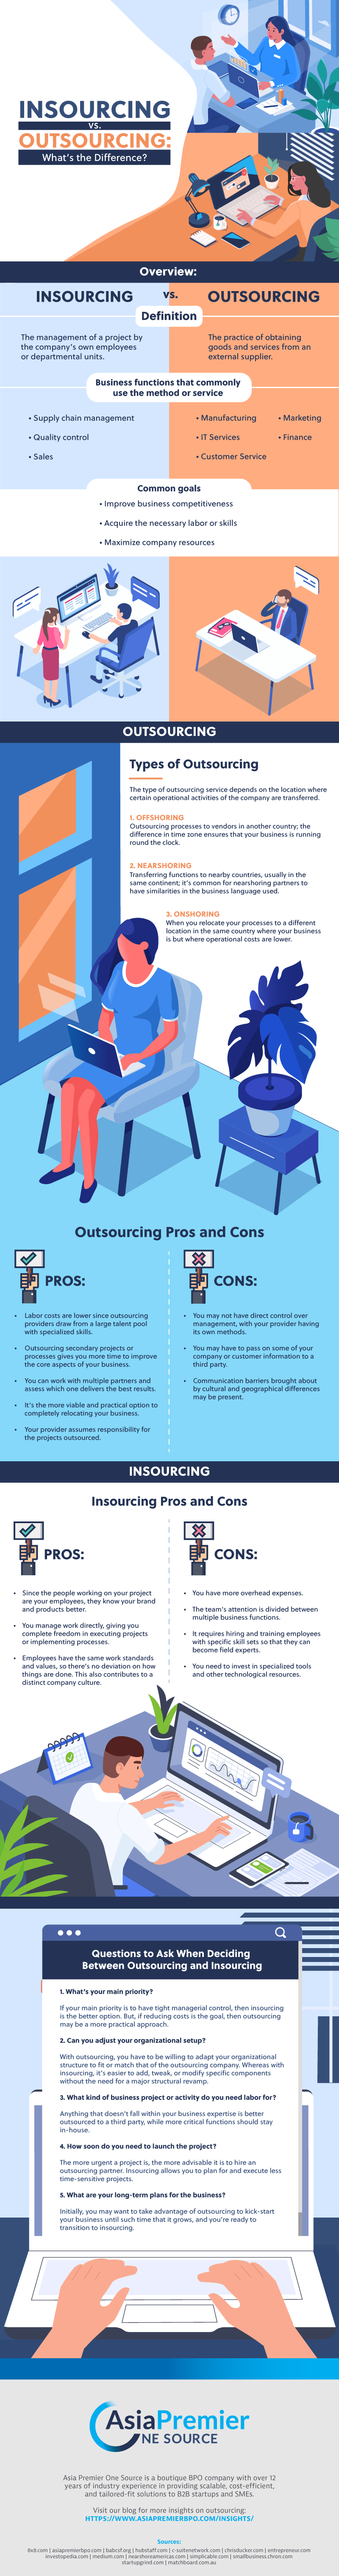 Insourcing vs. Outsourcing: What’s the Difference?